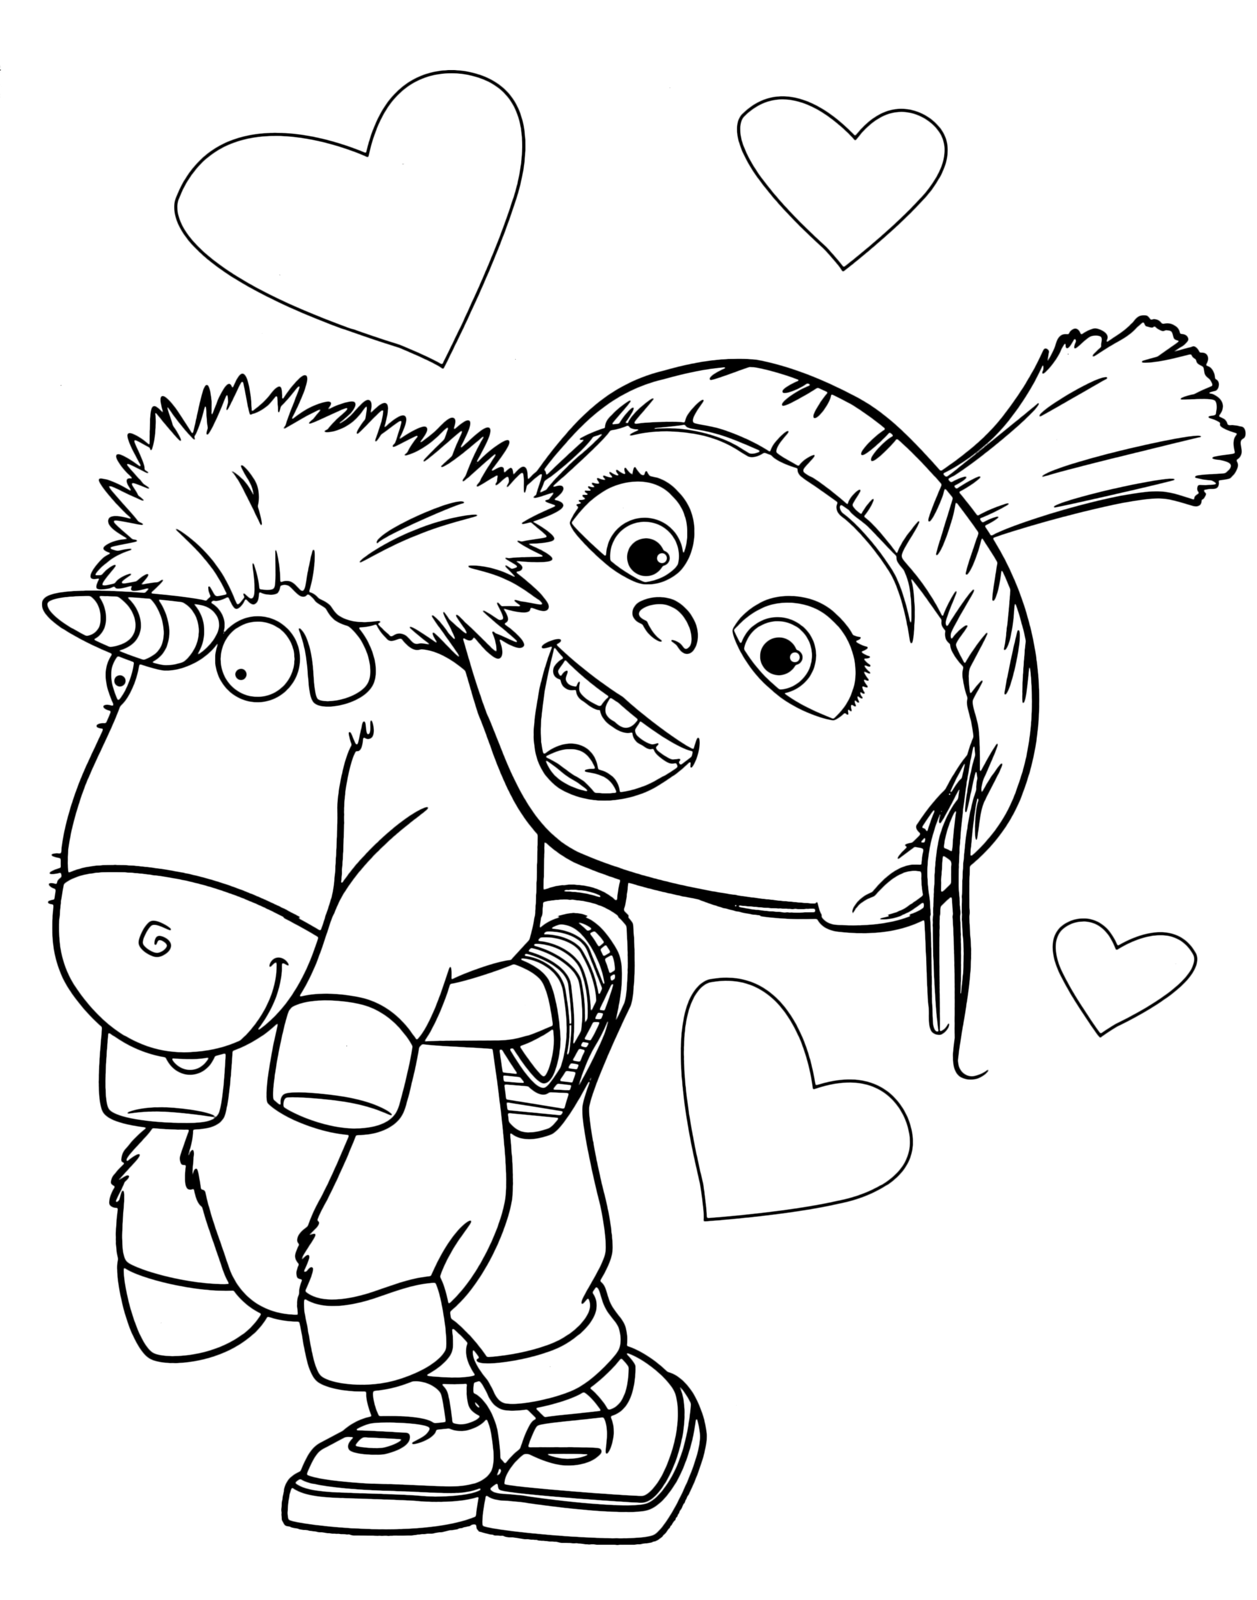 Despicable Me Unicorn Coloring Pages at GetColorings.com ...